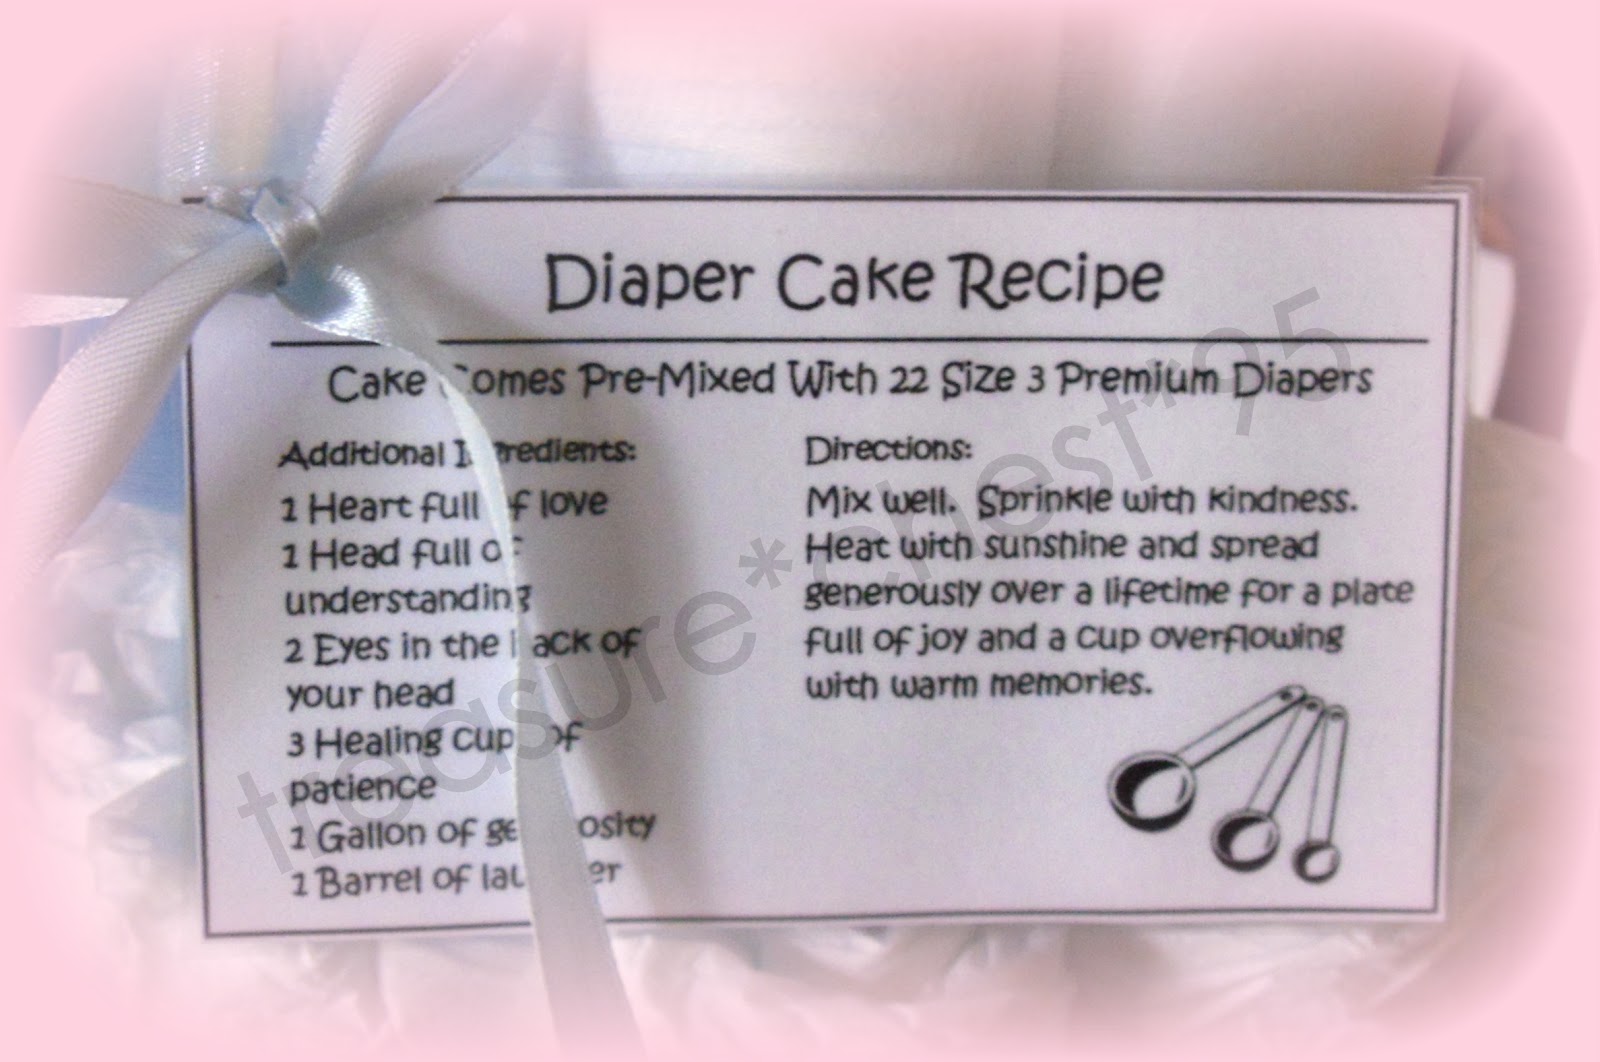   before baby outgrows it laminated recipe card attached to back of cake